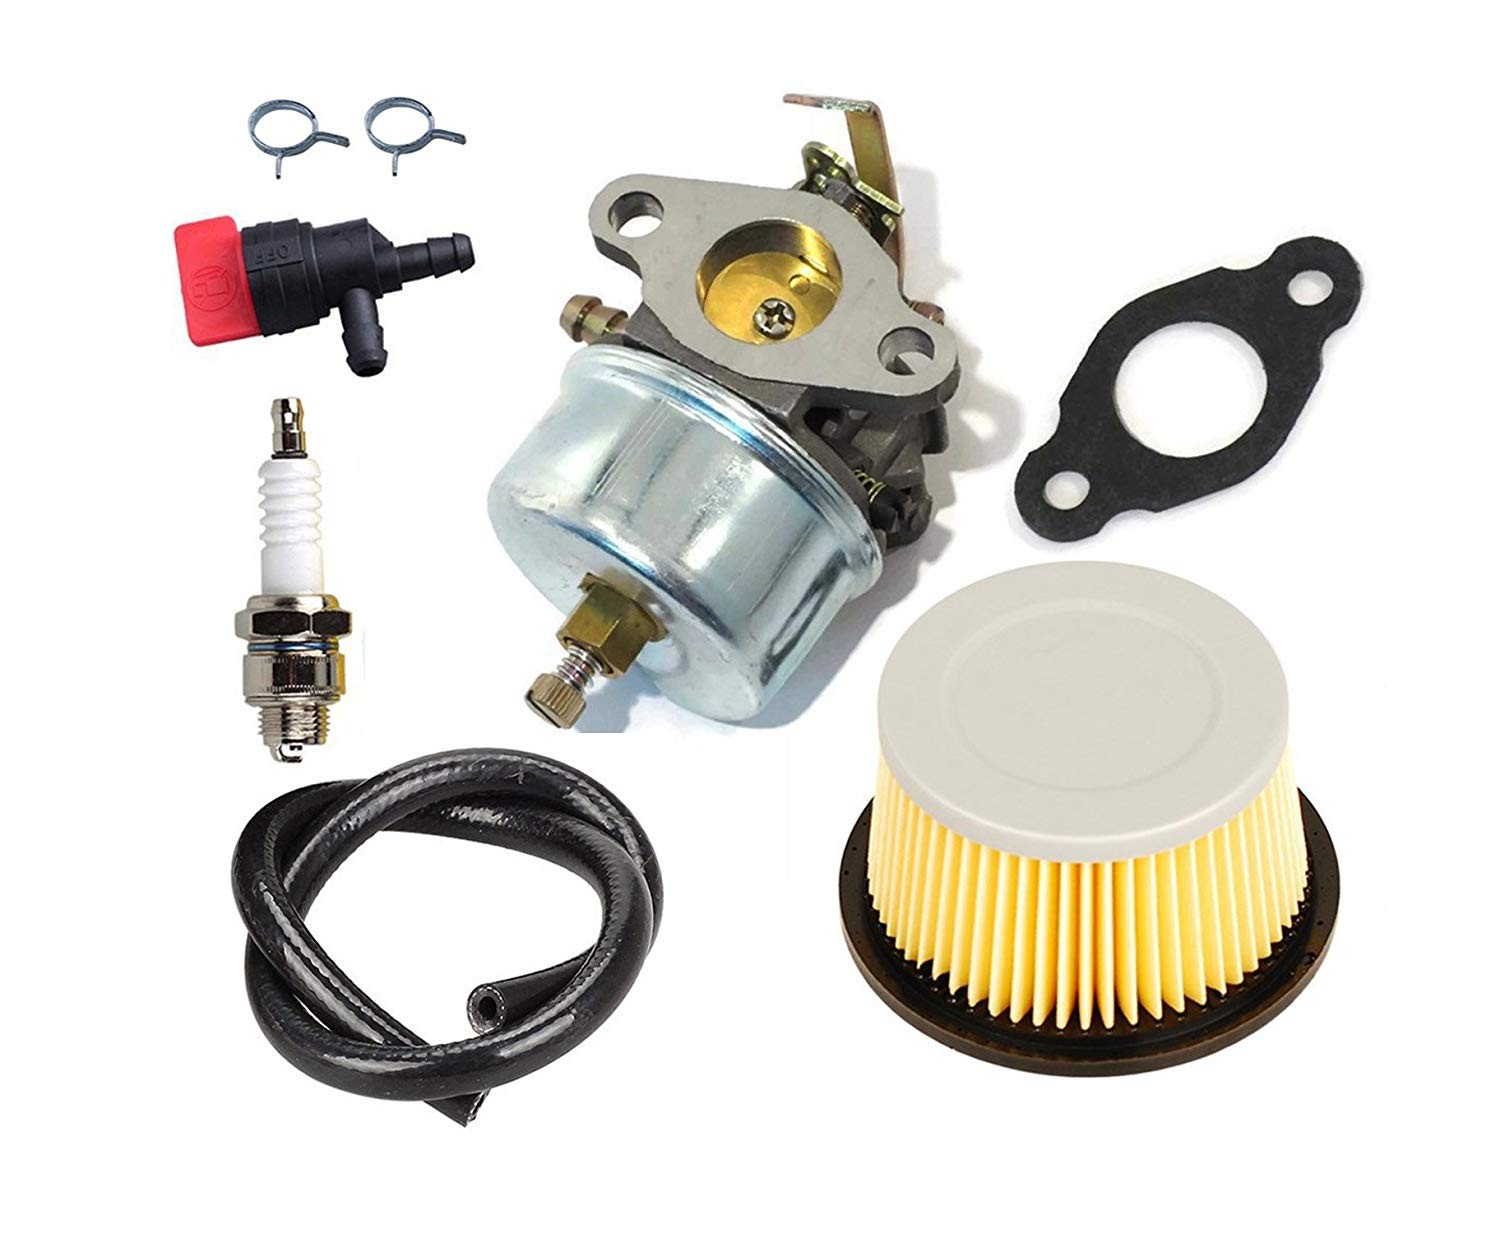 Amazon HIFROM Carburetor carb Kit With Air Filter 90 Degree Fuel Shut f Valve Fuel Line for Tecumseh H30 H50 H60 HH60 Engines